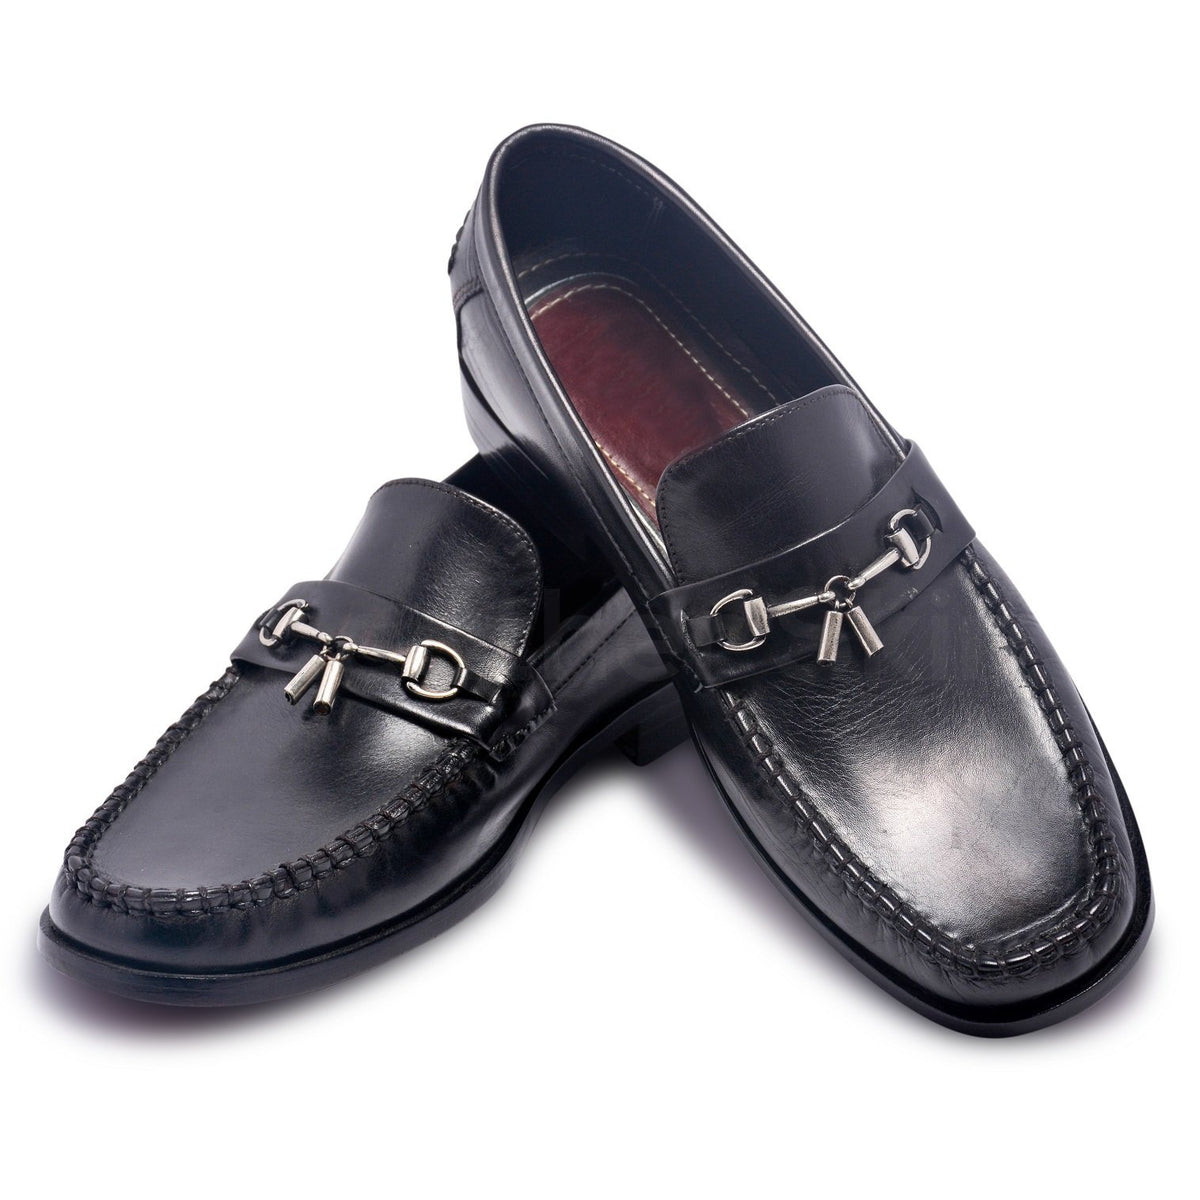 Major Loafers - Luxury Loafers and Moccasins - Shoes